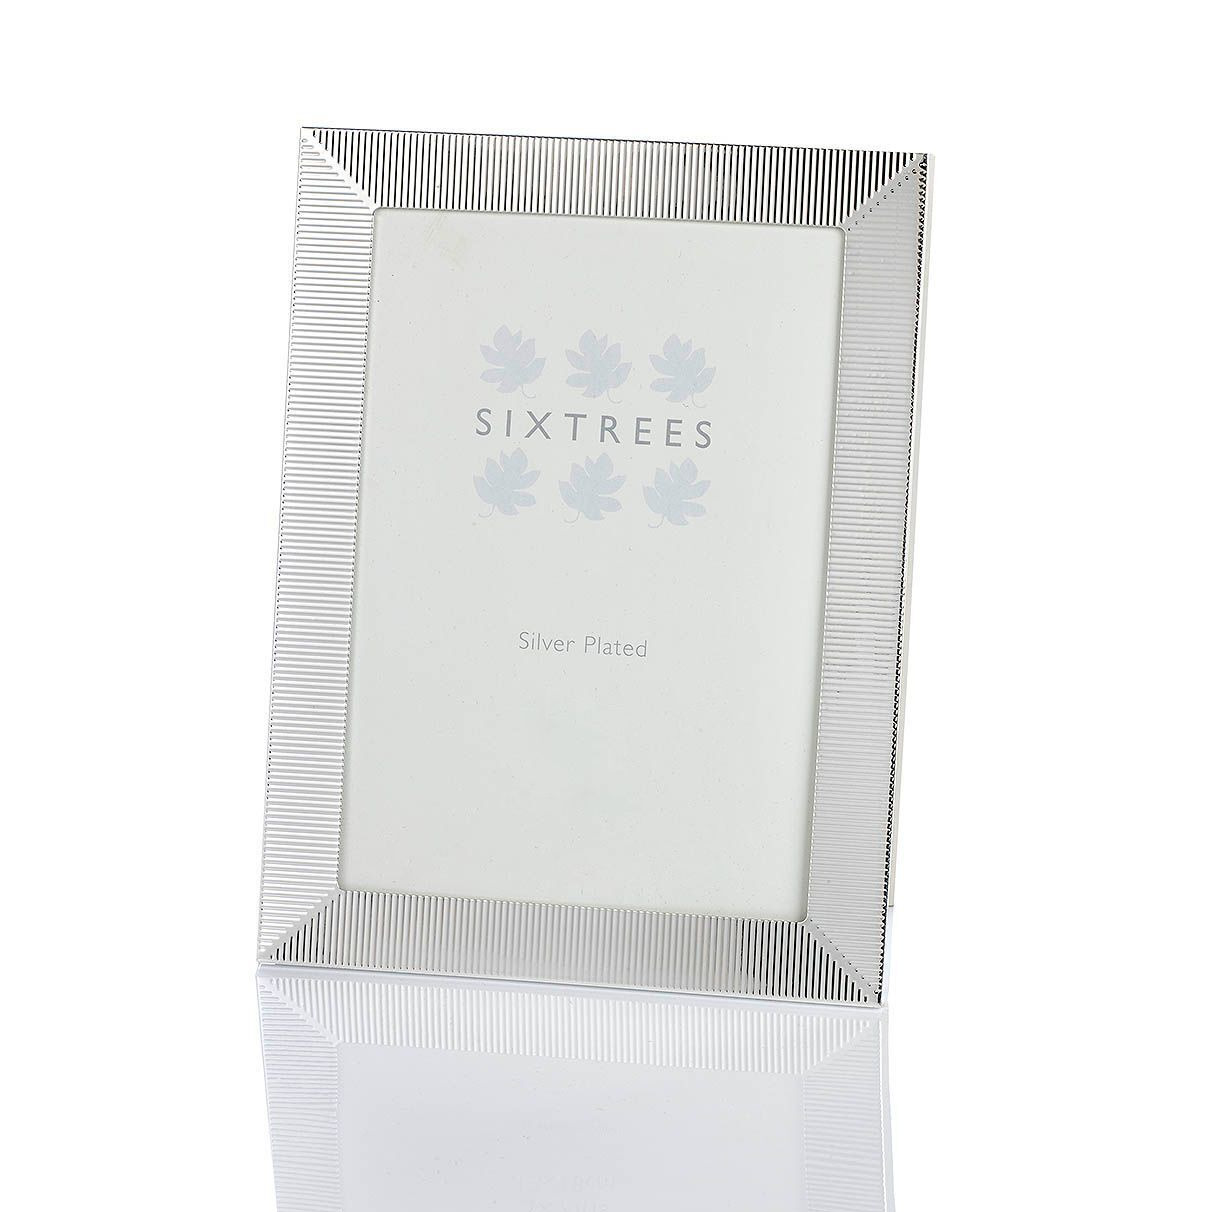 Sixtrees Striped Freestanding Photo Frame, Silver Plated